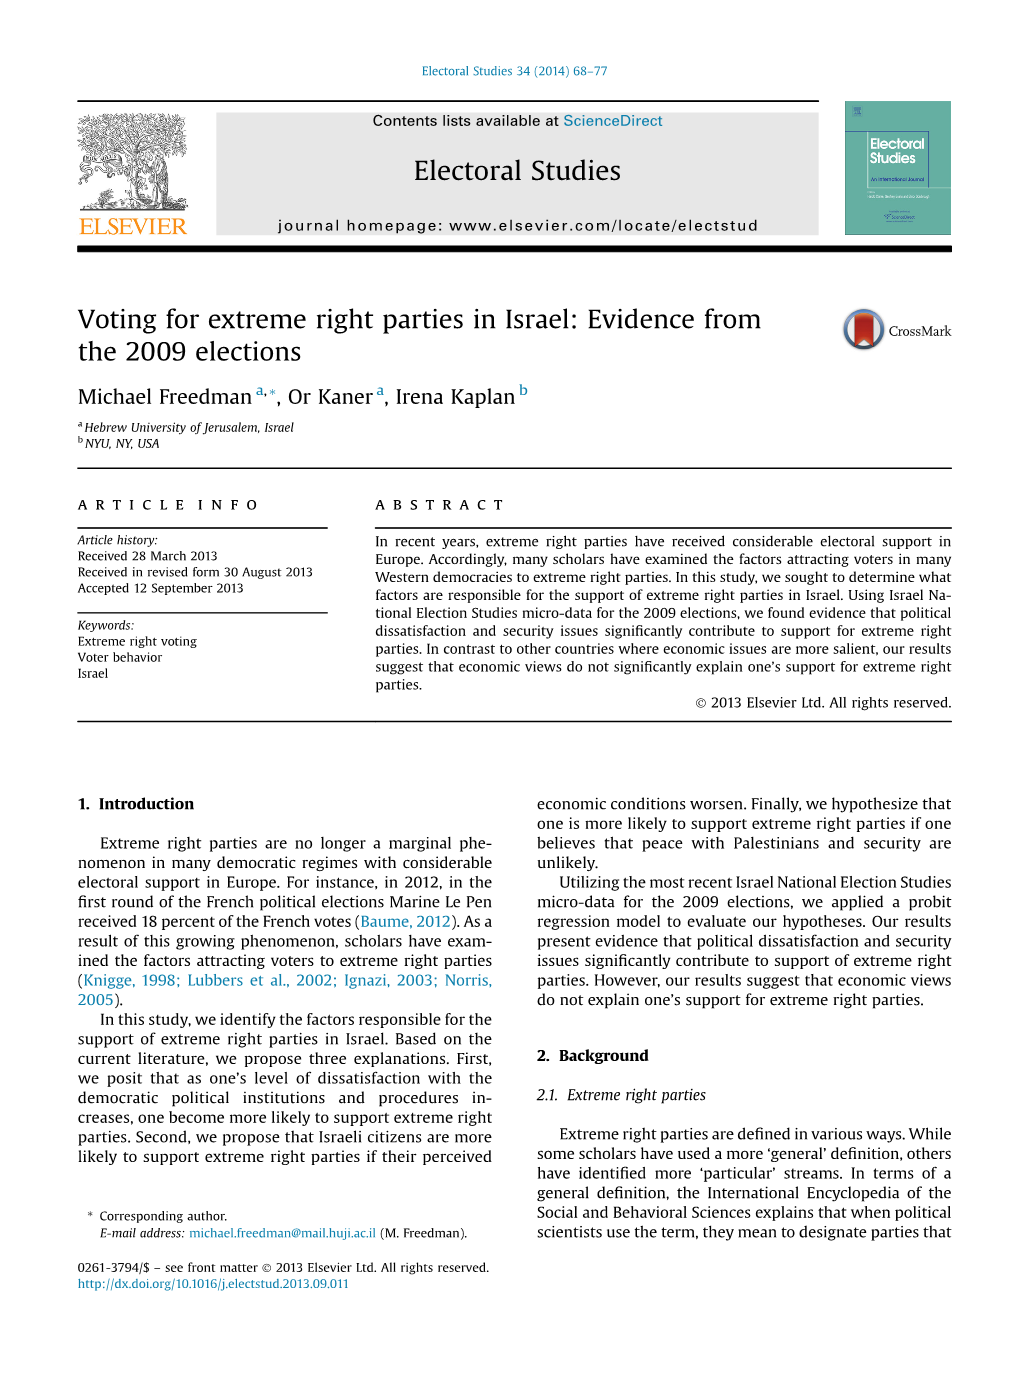 Voting for Extreme Right Parties in Israel: Evidence from the 2009 Elections